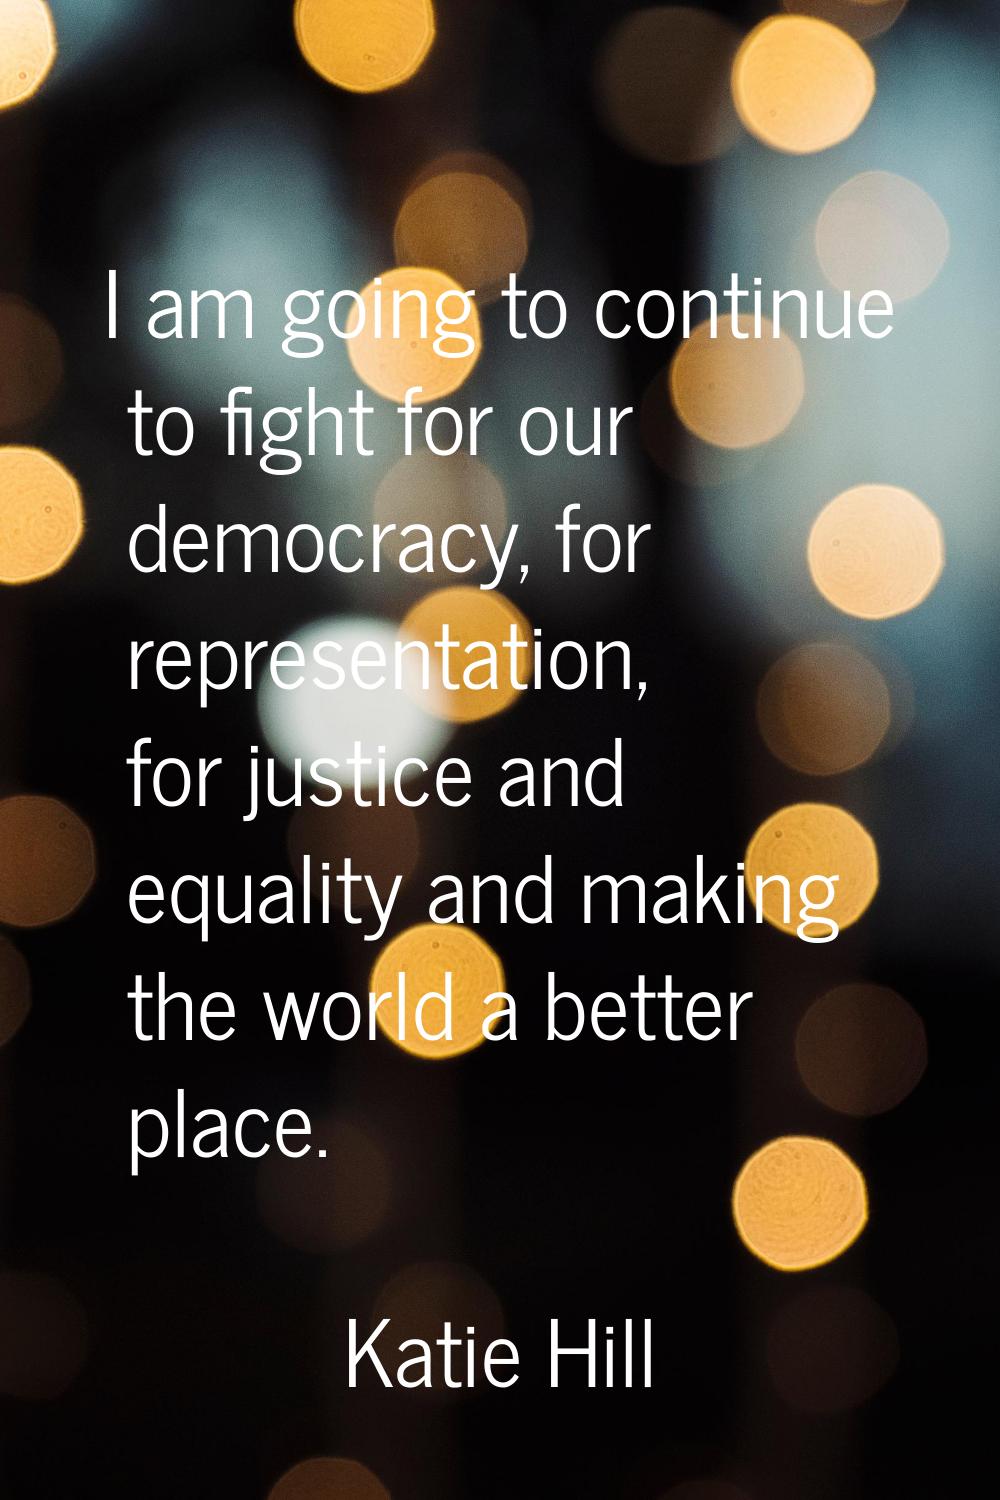 I am going to continue to fight for our democracy, for representation, for justice and equality and